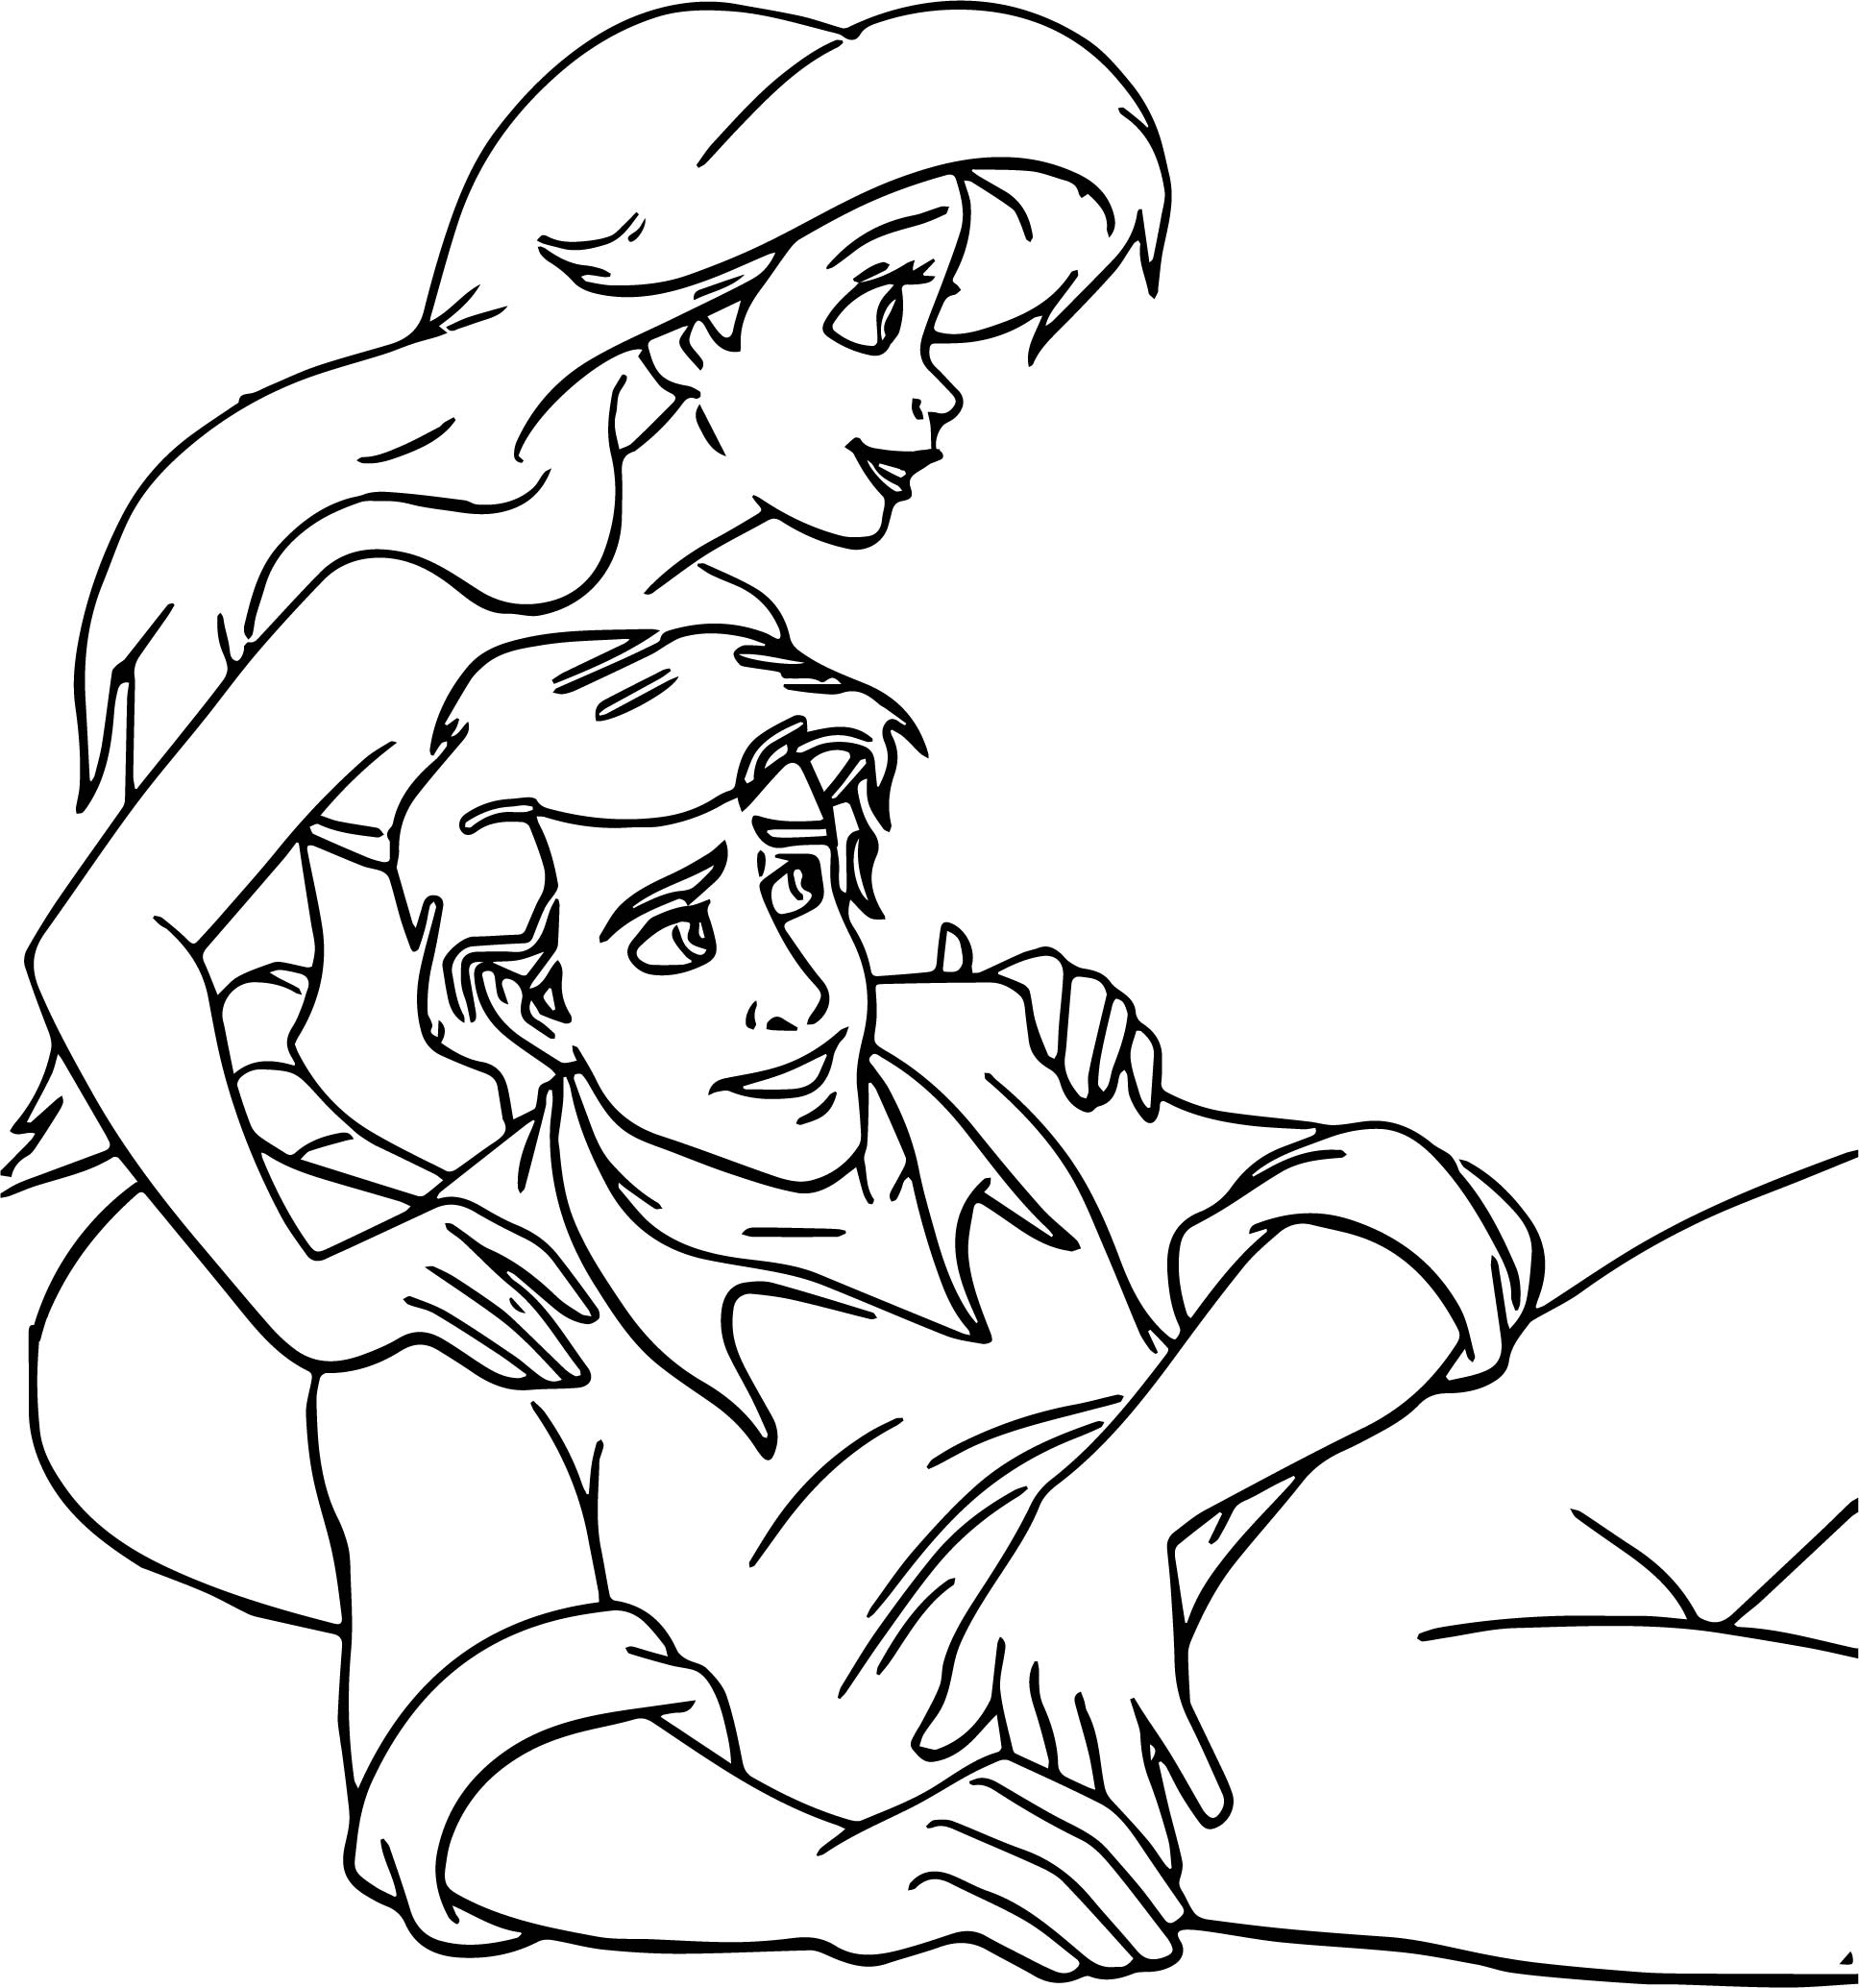 176 Cute Coloring Pages For Boyfriend for Kindergarten